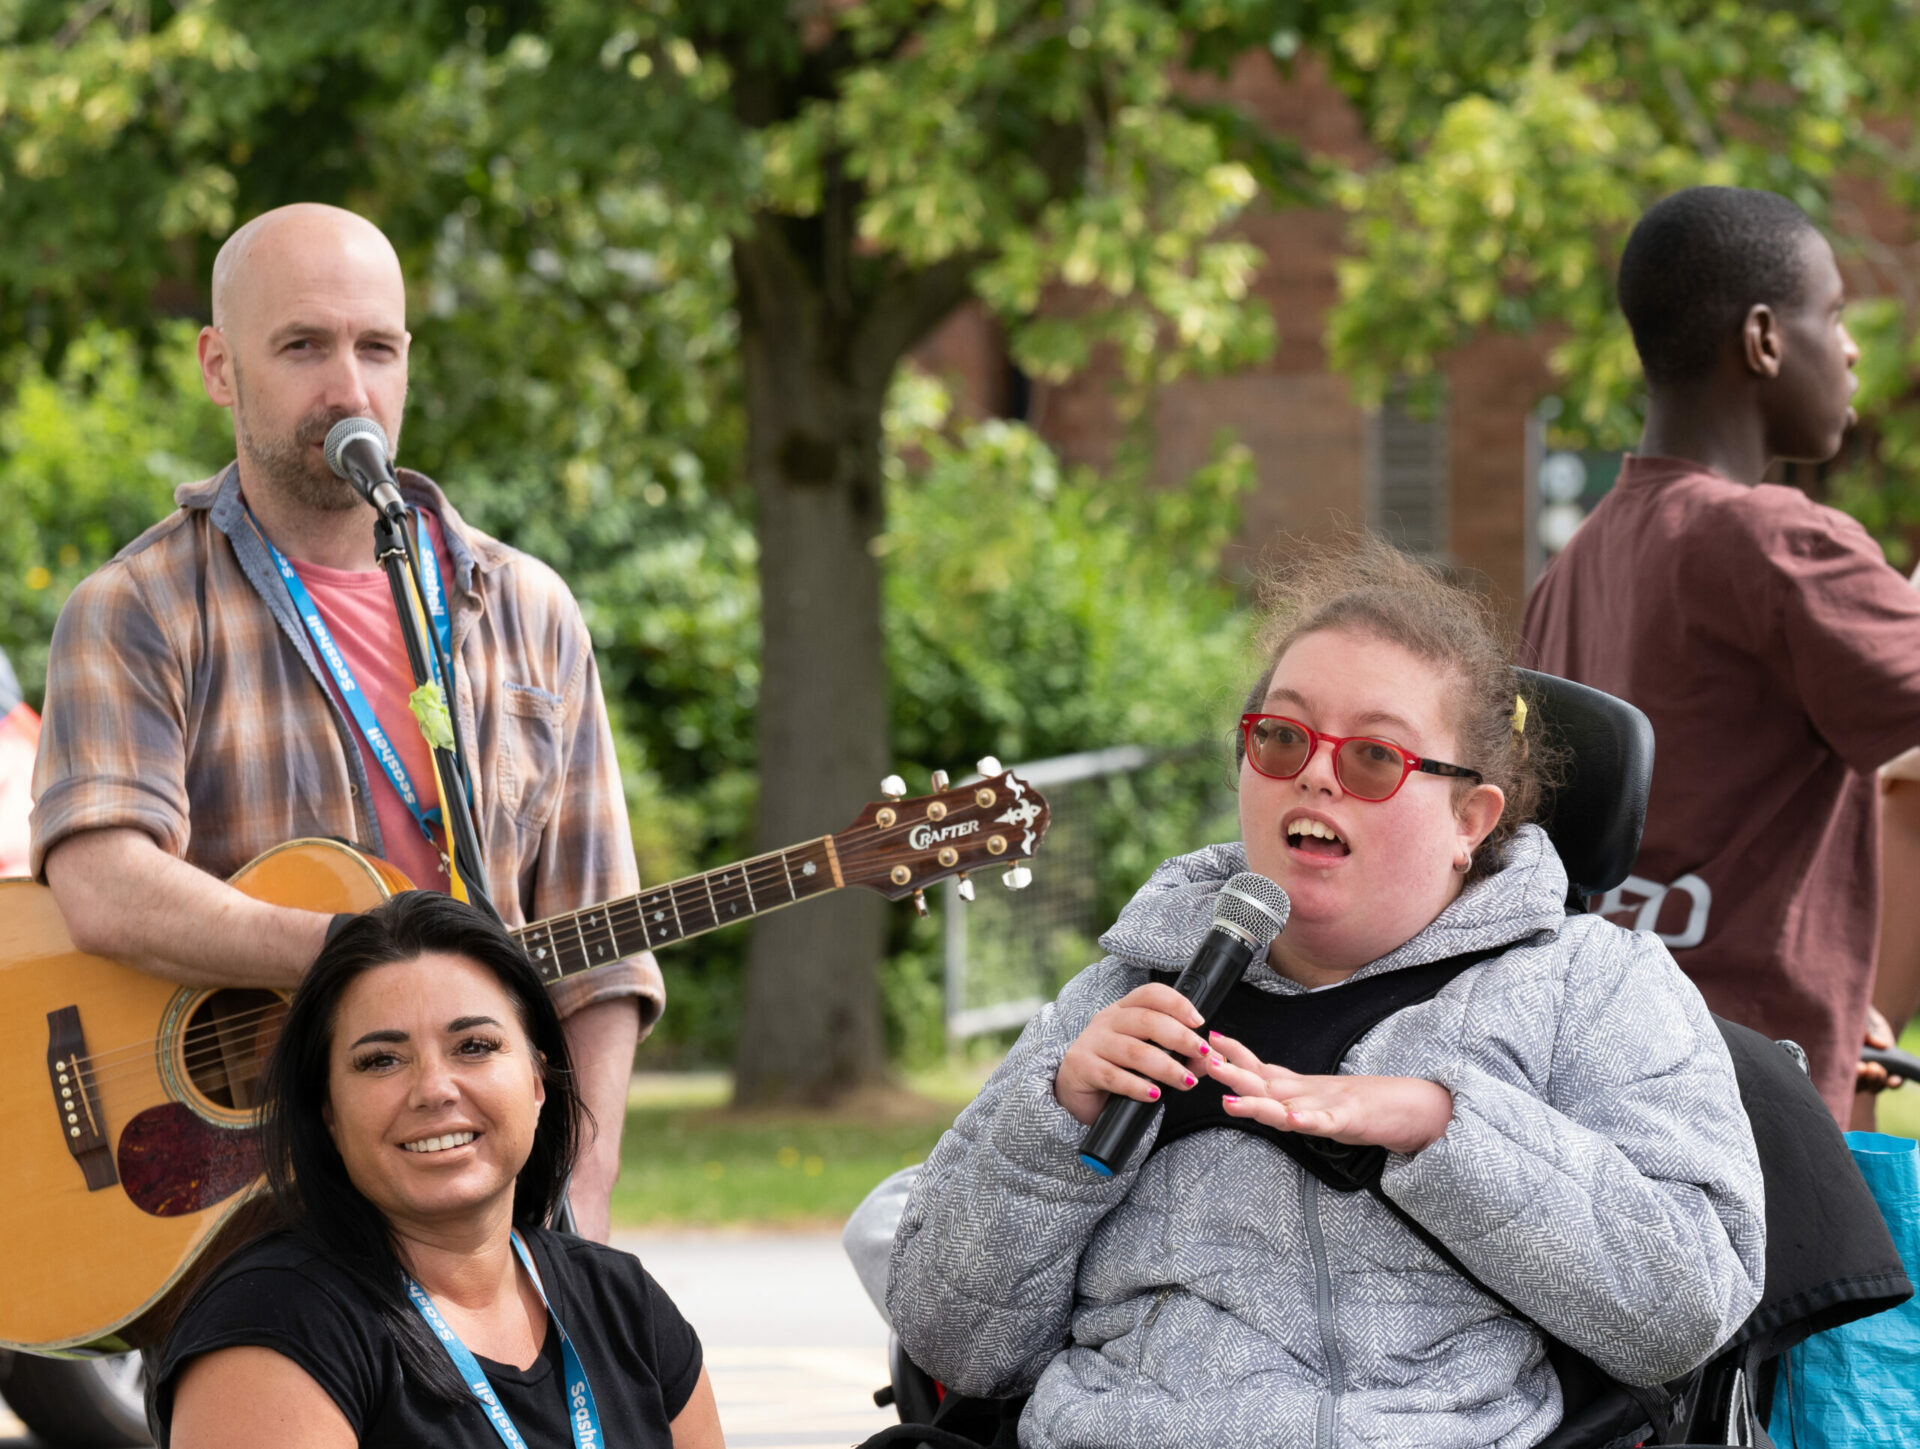 man in striped top stood holding guitar next to a girl sat in a wheelchair wearing a grey top and holding a microphone with seashell worker kneeling down next to her